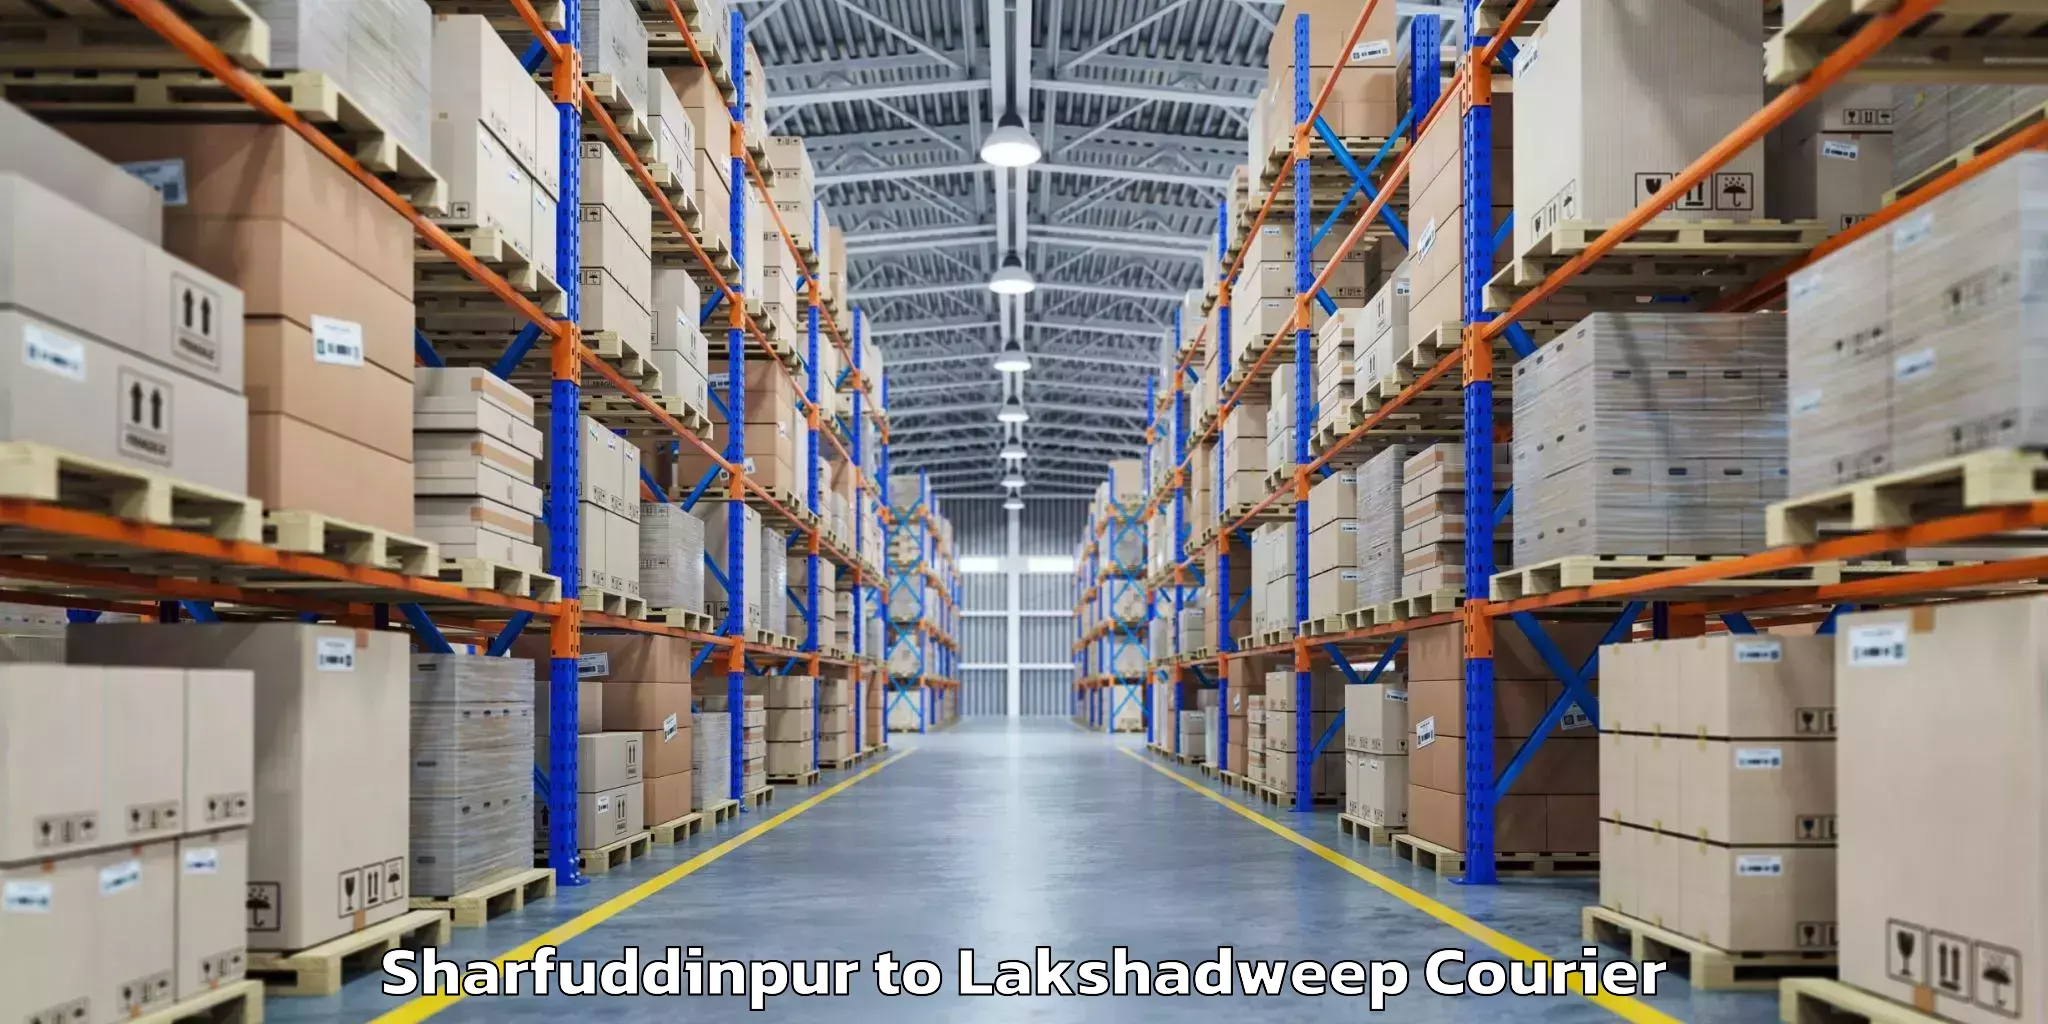 Baggage delivery management Sharfuddinpur to Lakshadweep